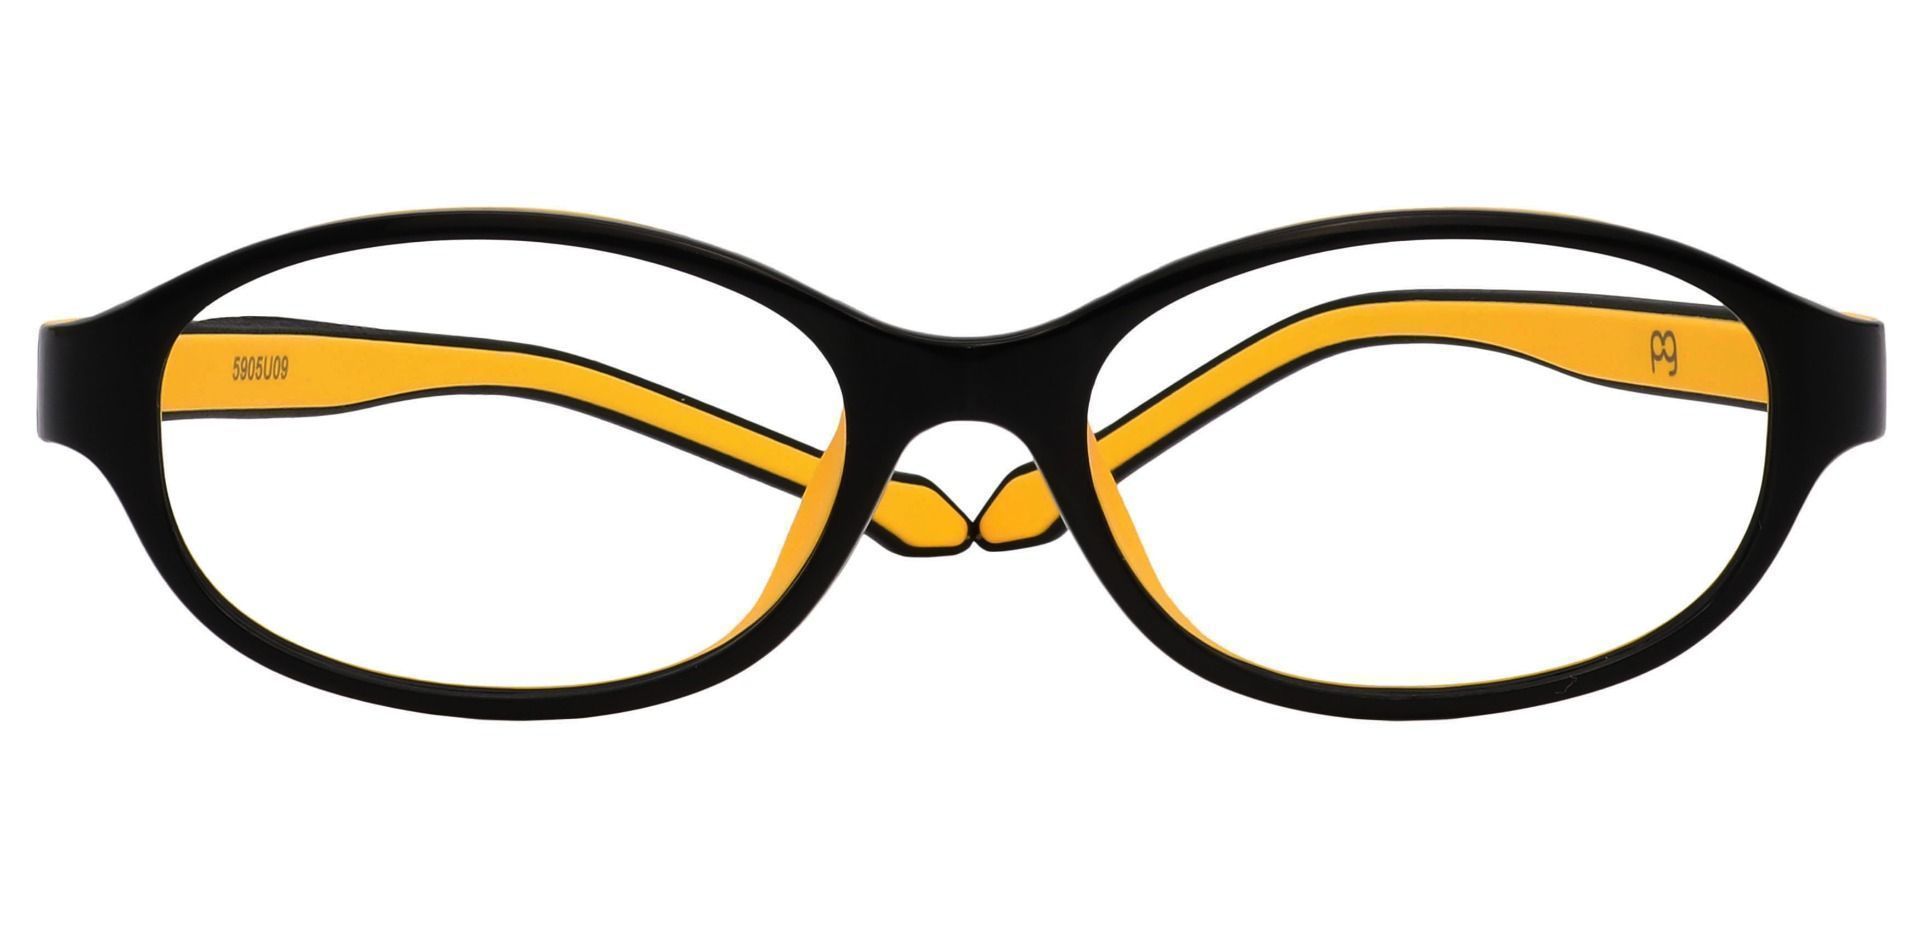 Stone Oval Lined Bifocal Glasses - The Frame Is Black And Yellow